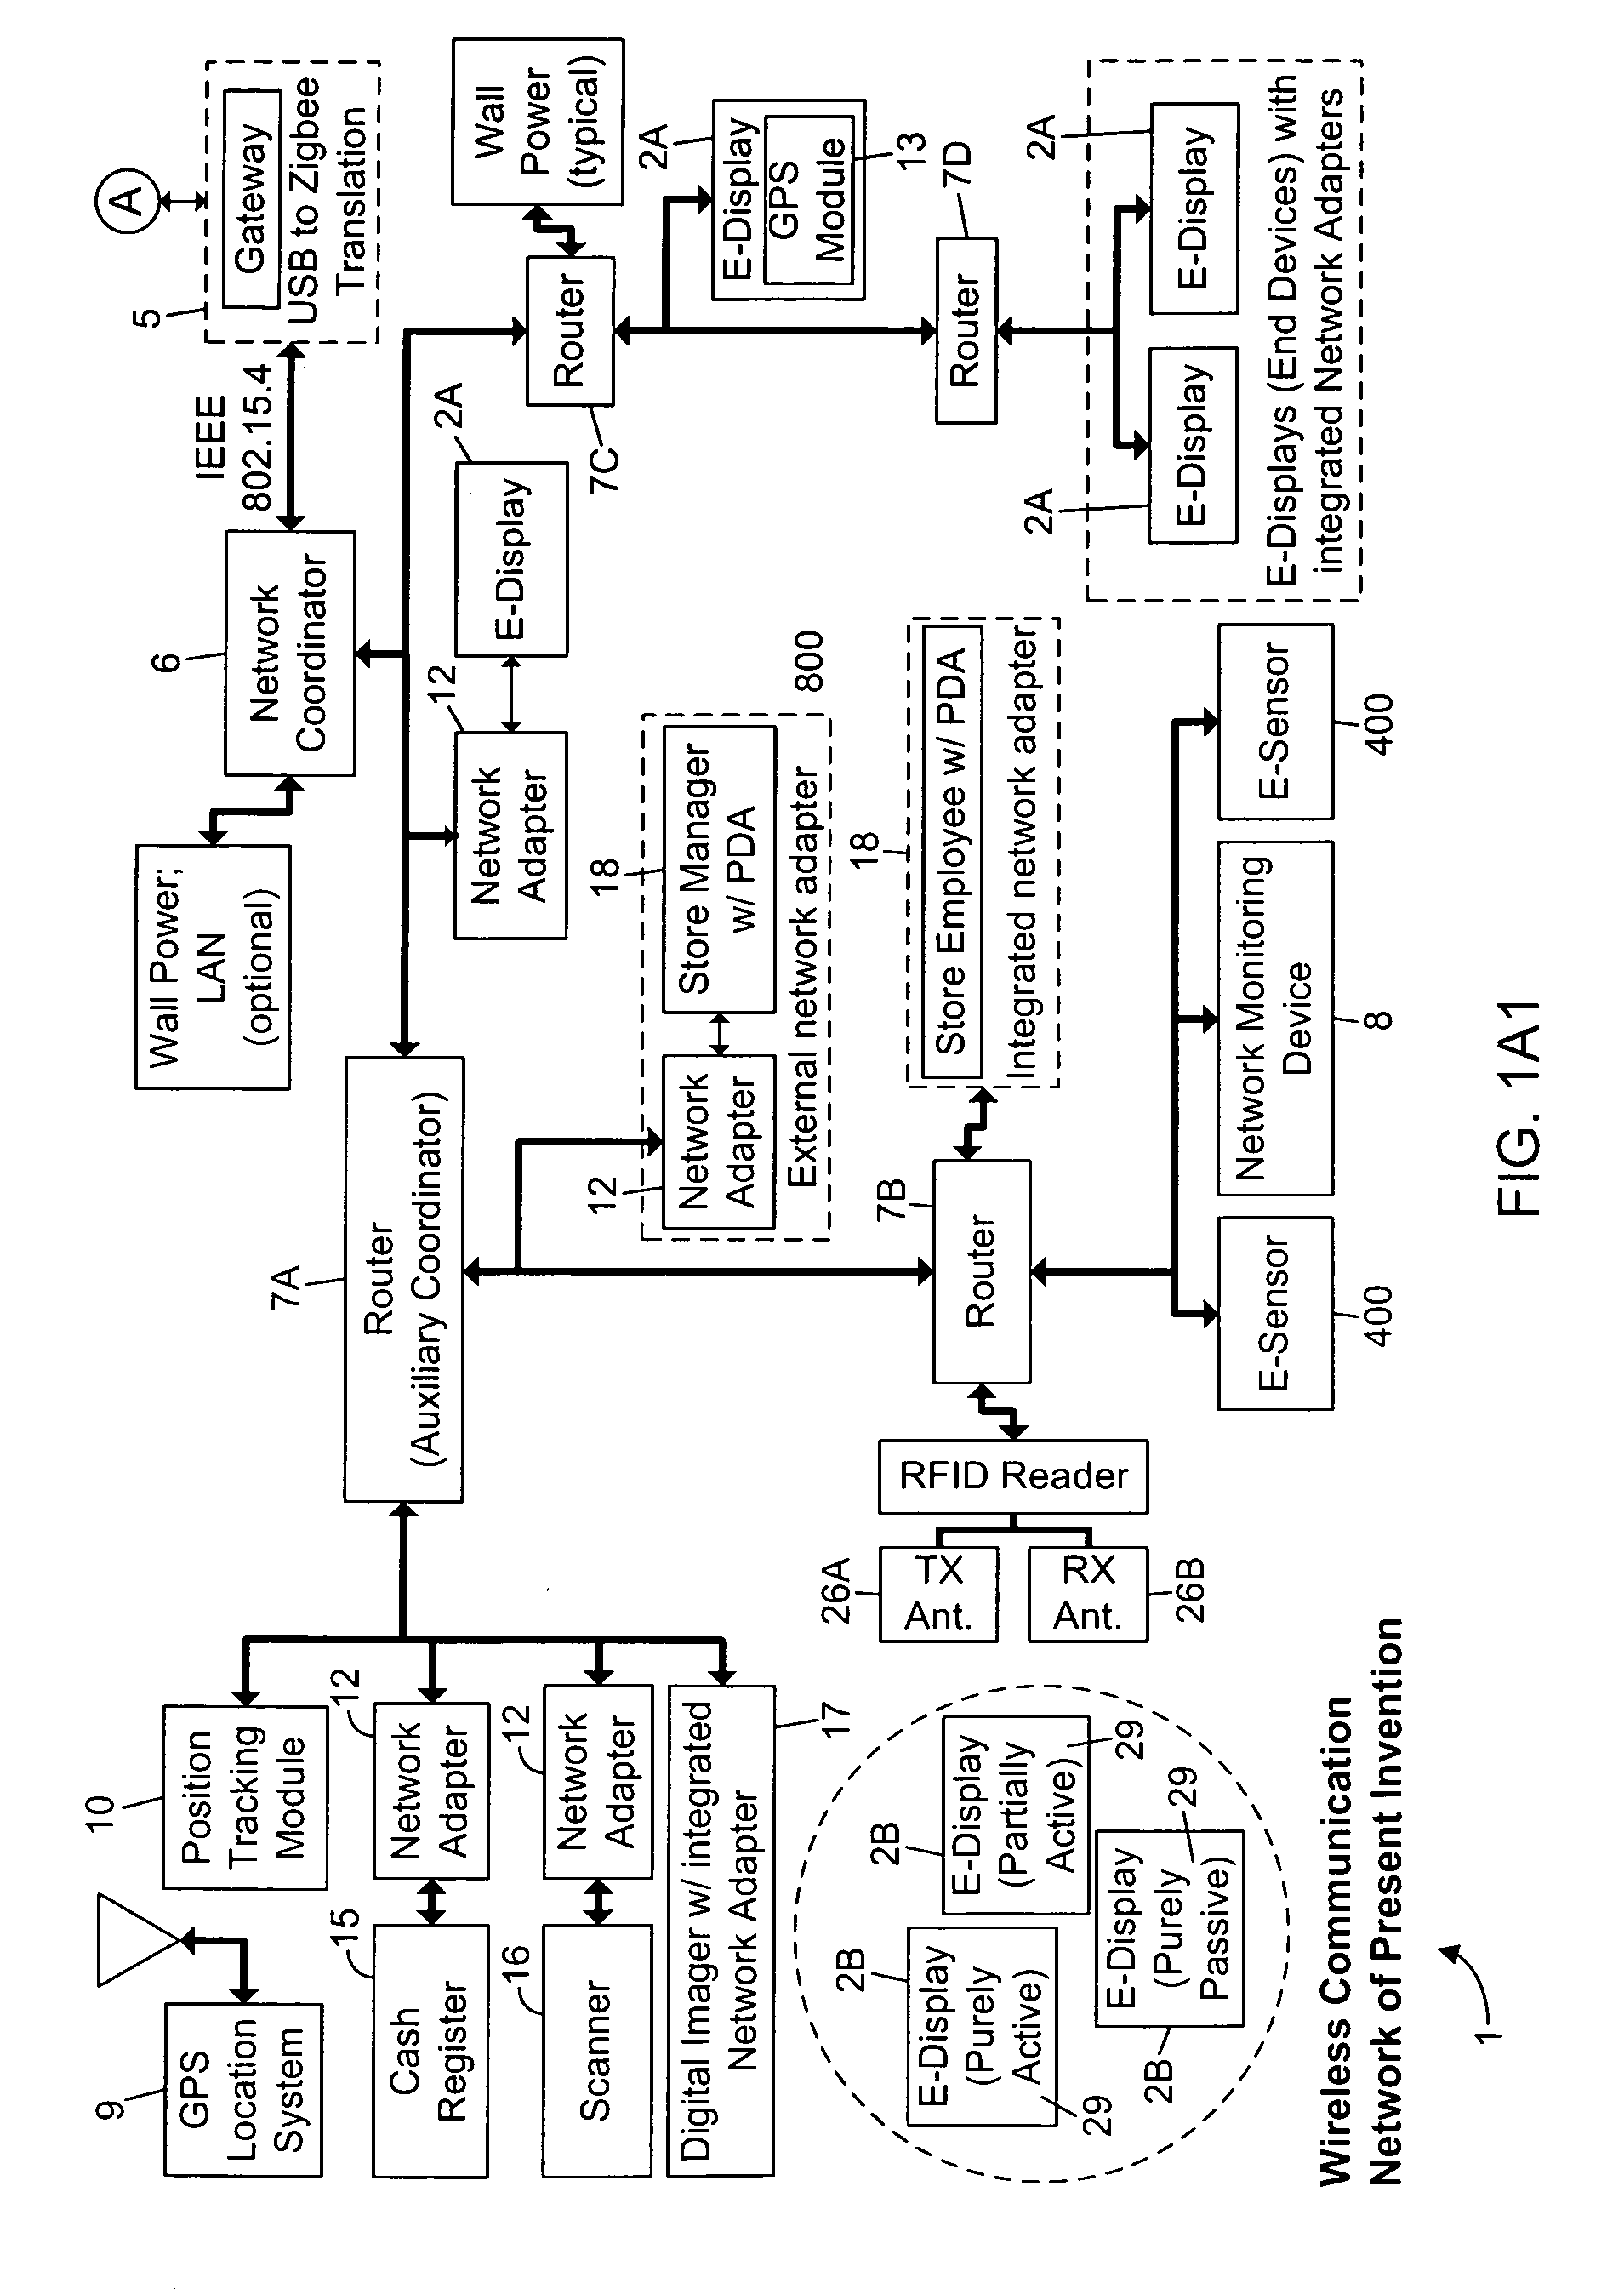 Methods of and apparatus for programming and managing diverse network components, including electronic-ink based display devices, in a mesh-type wireless communication network